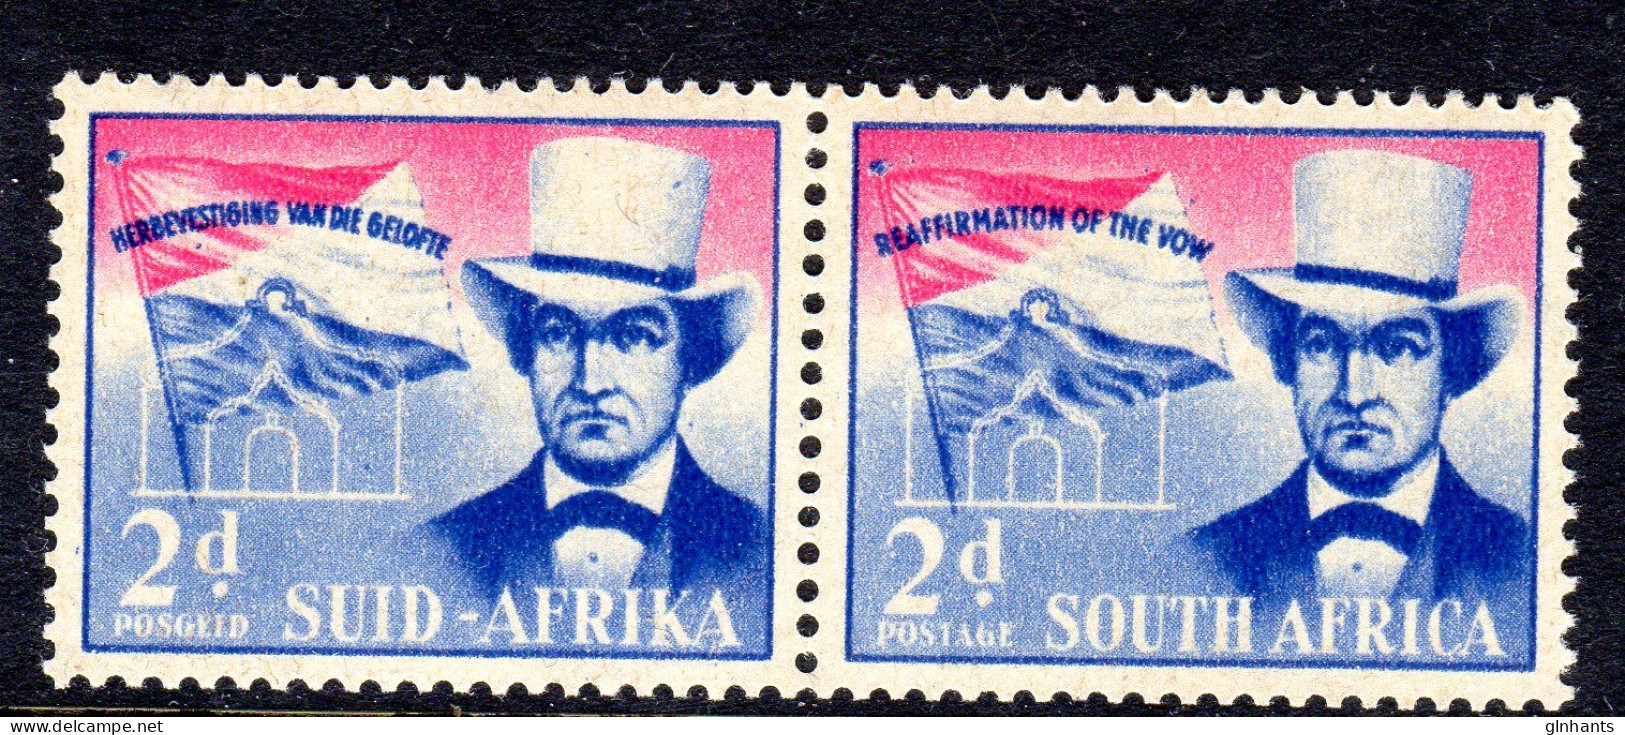 SOUTH AFRICA - 1955 VOORTREKKER COVENANT STAMP PAIR FINE LIGHTLY MOUNTED MINT LMM * SG 167 - Unused Stamps